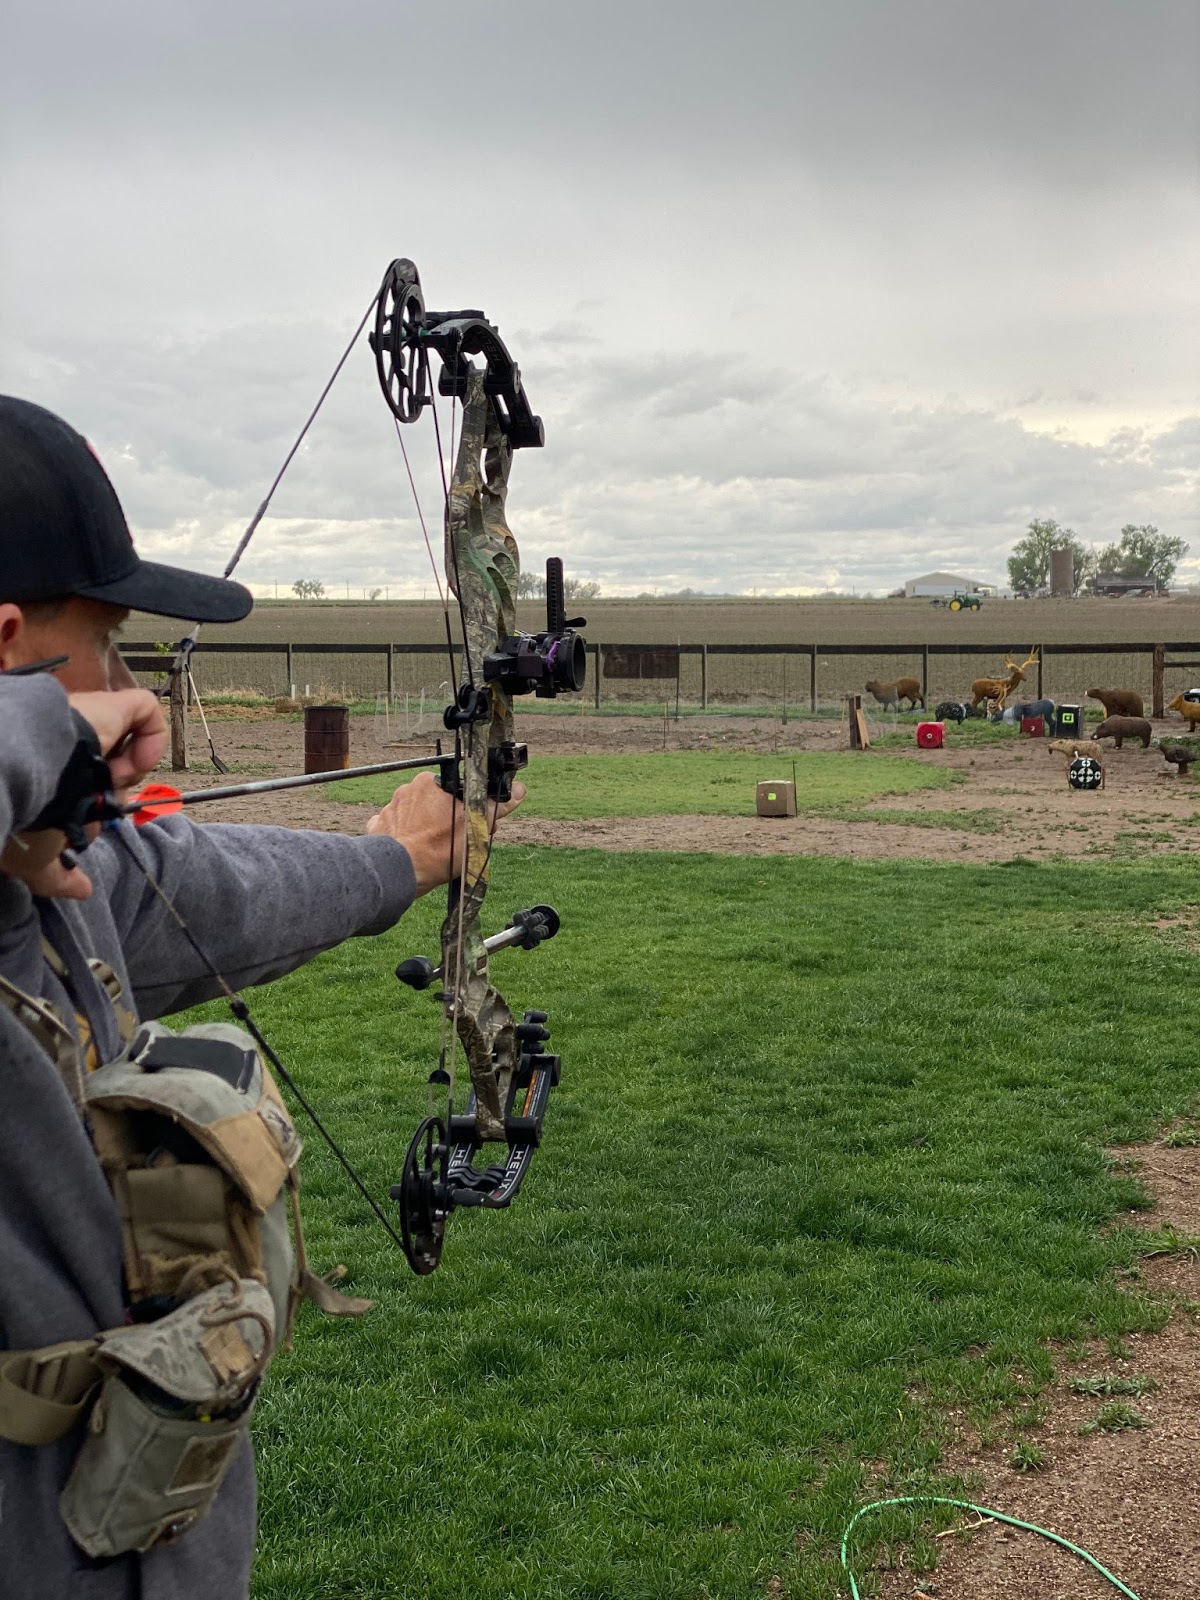 Man shooting with the Hoyt Helix Turbo